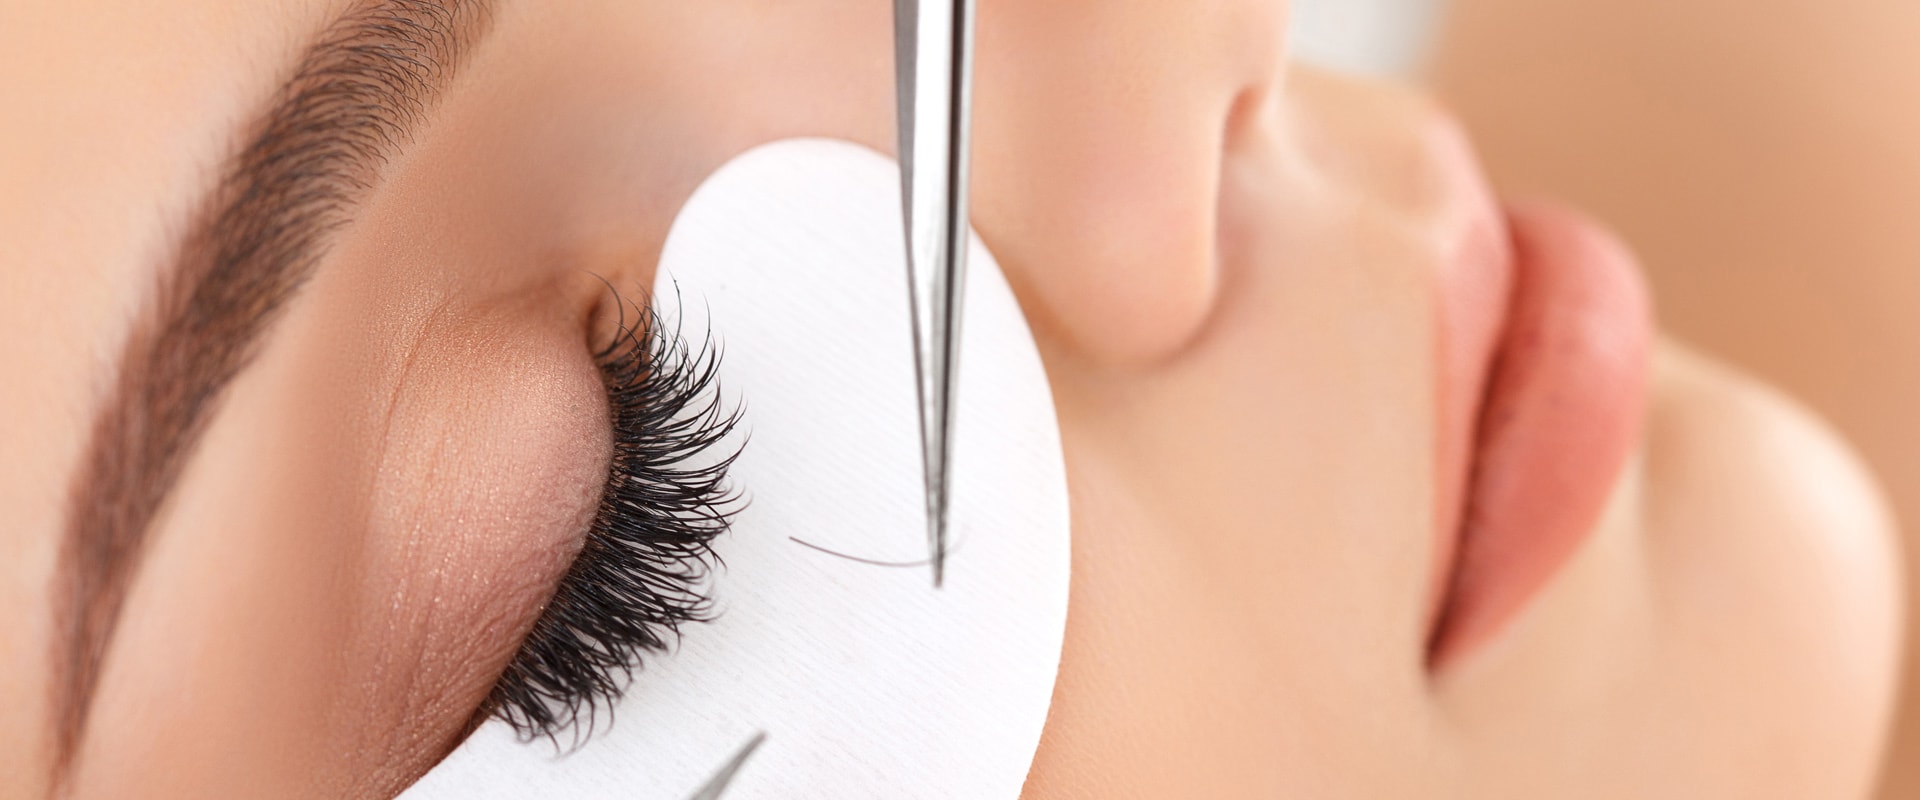 Are lash extensions made from human hair?